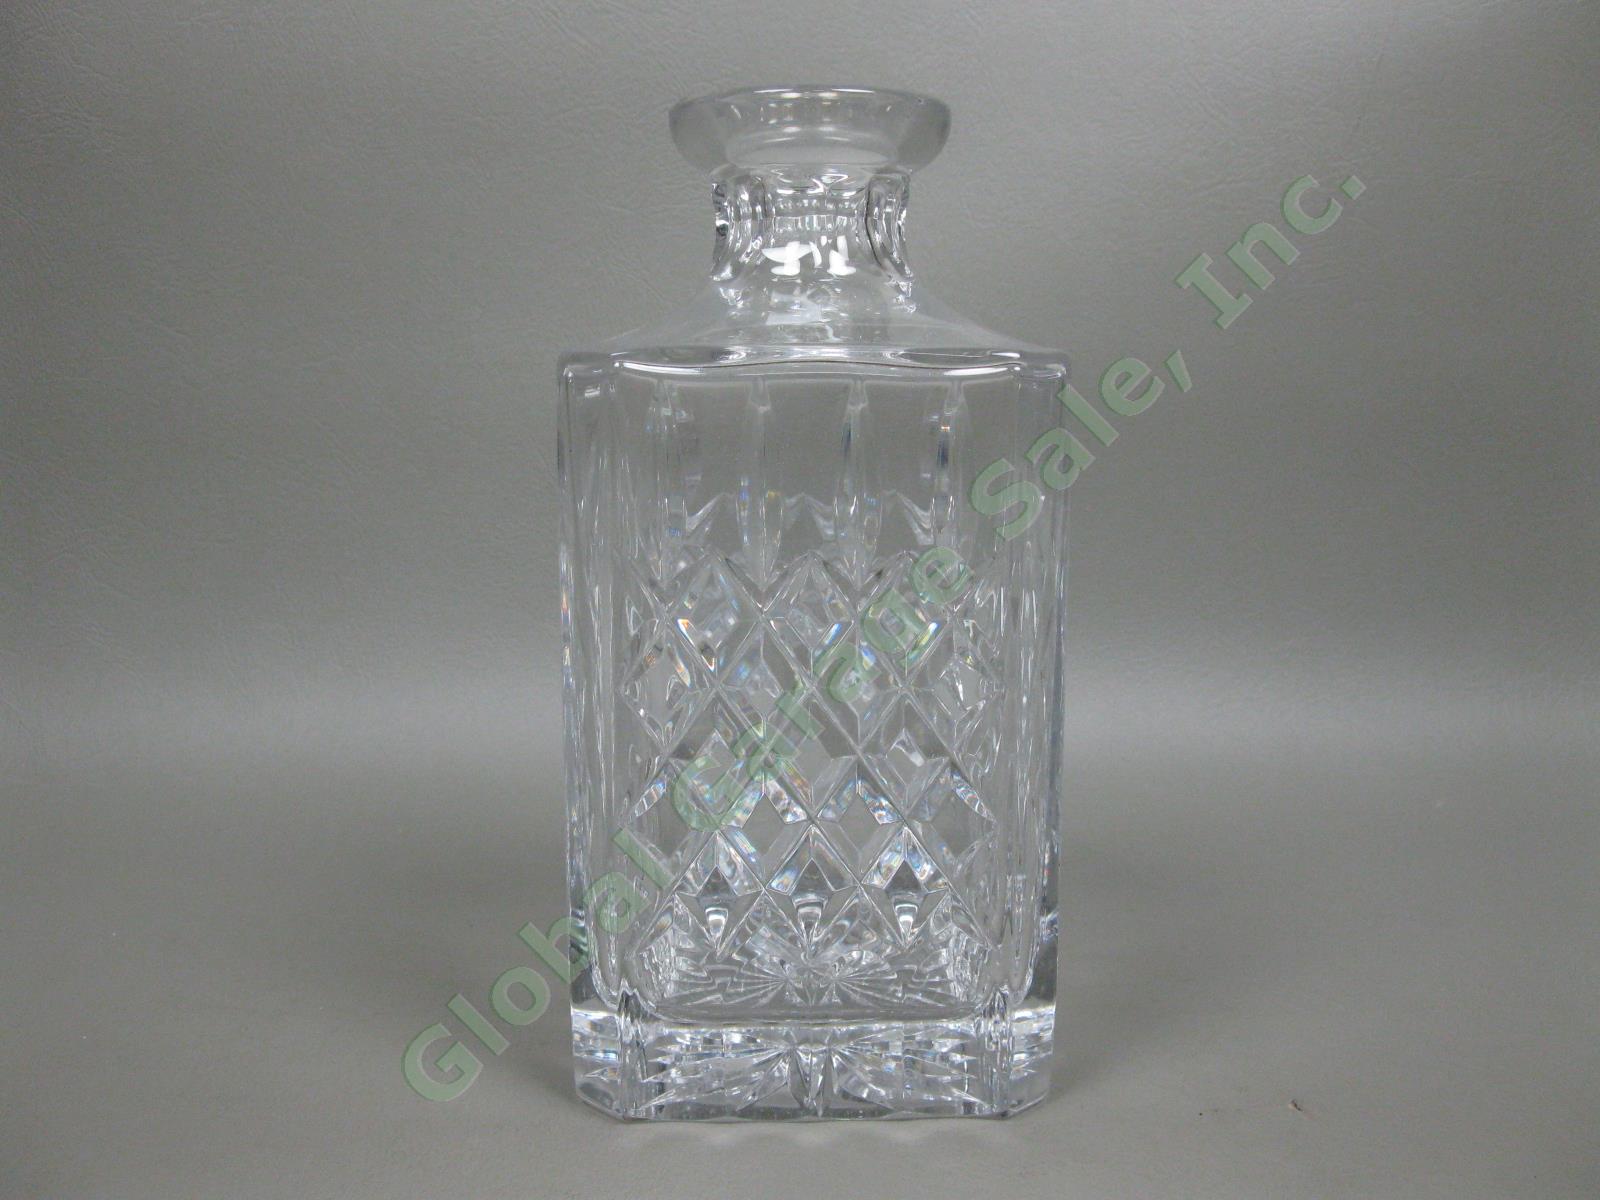 Vintage Waterford 10.75" Cut Crystal Rectangular Glass Liquor Decanter & Stopper 1